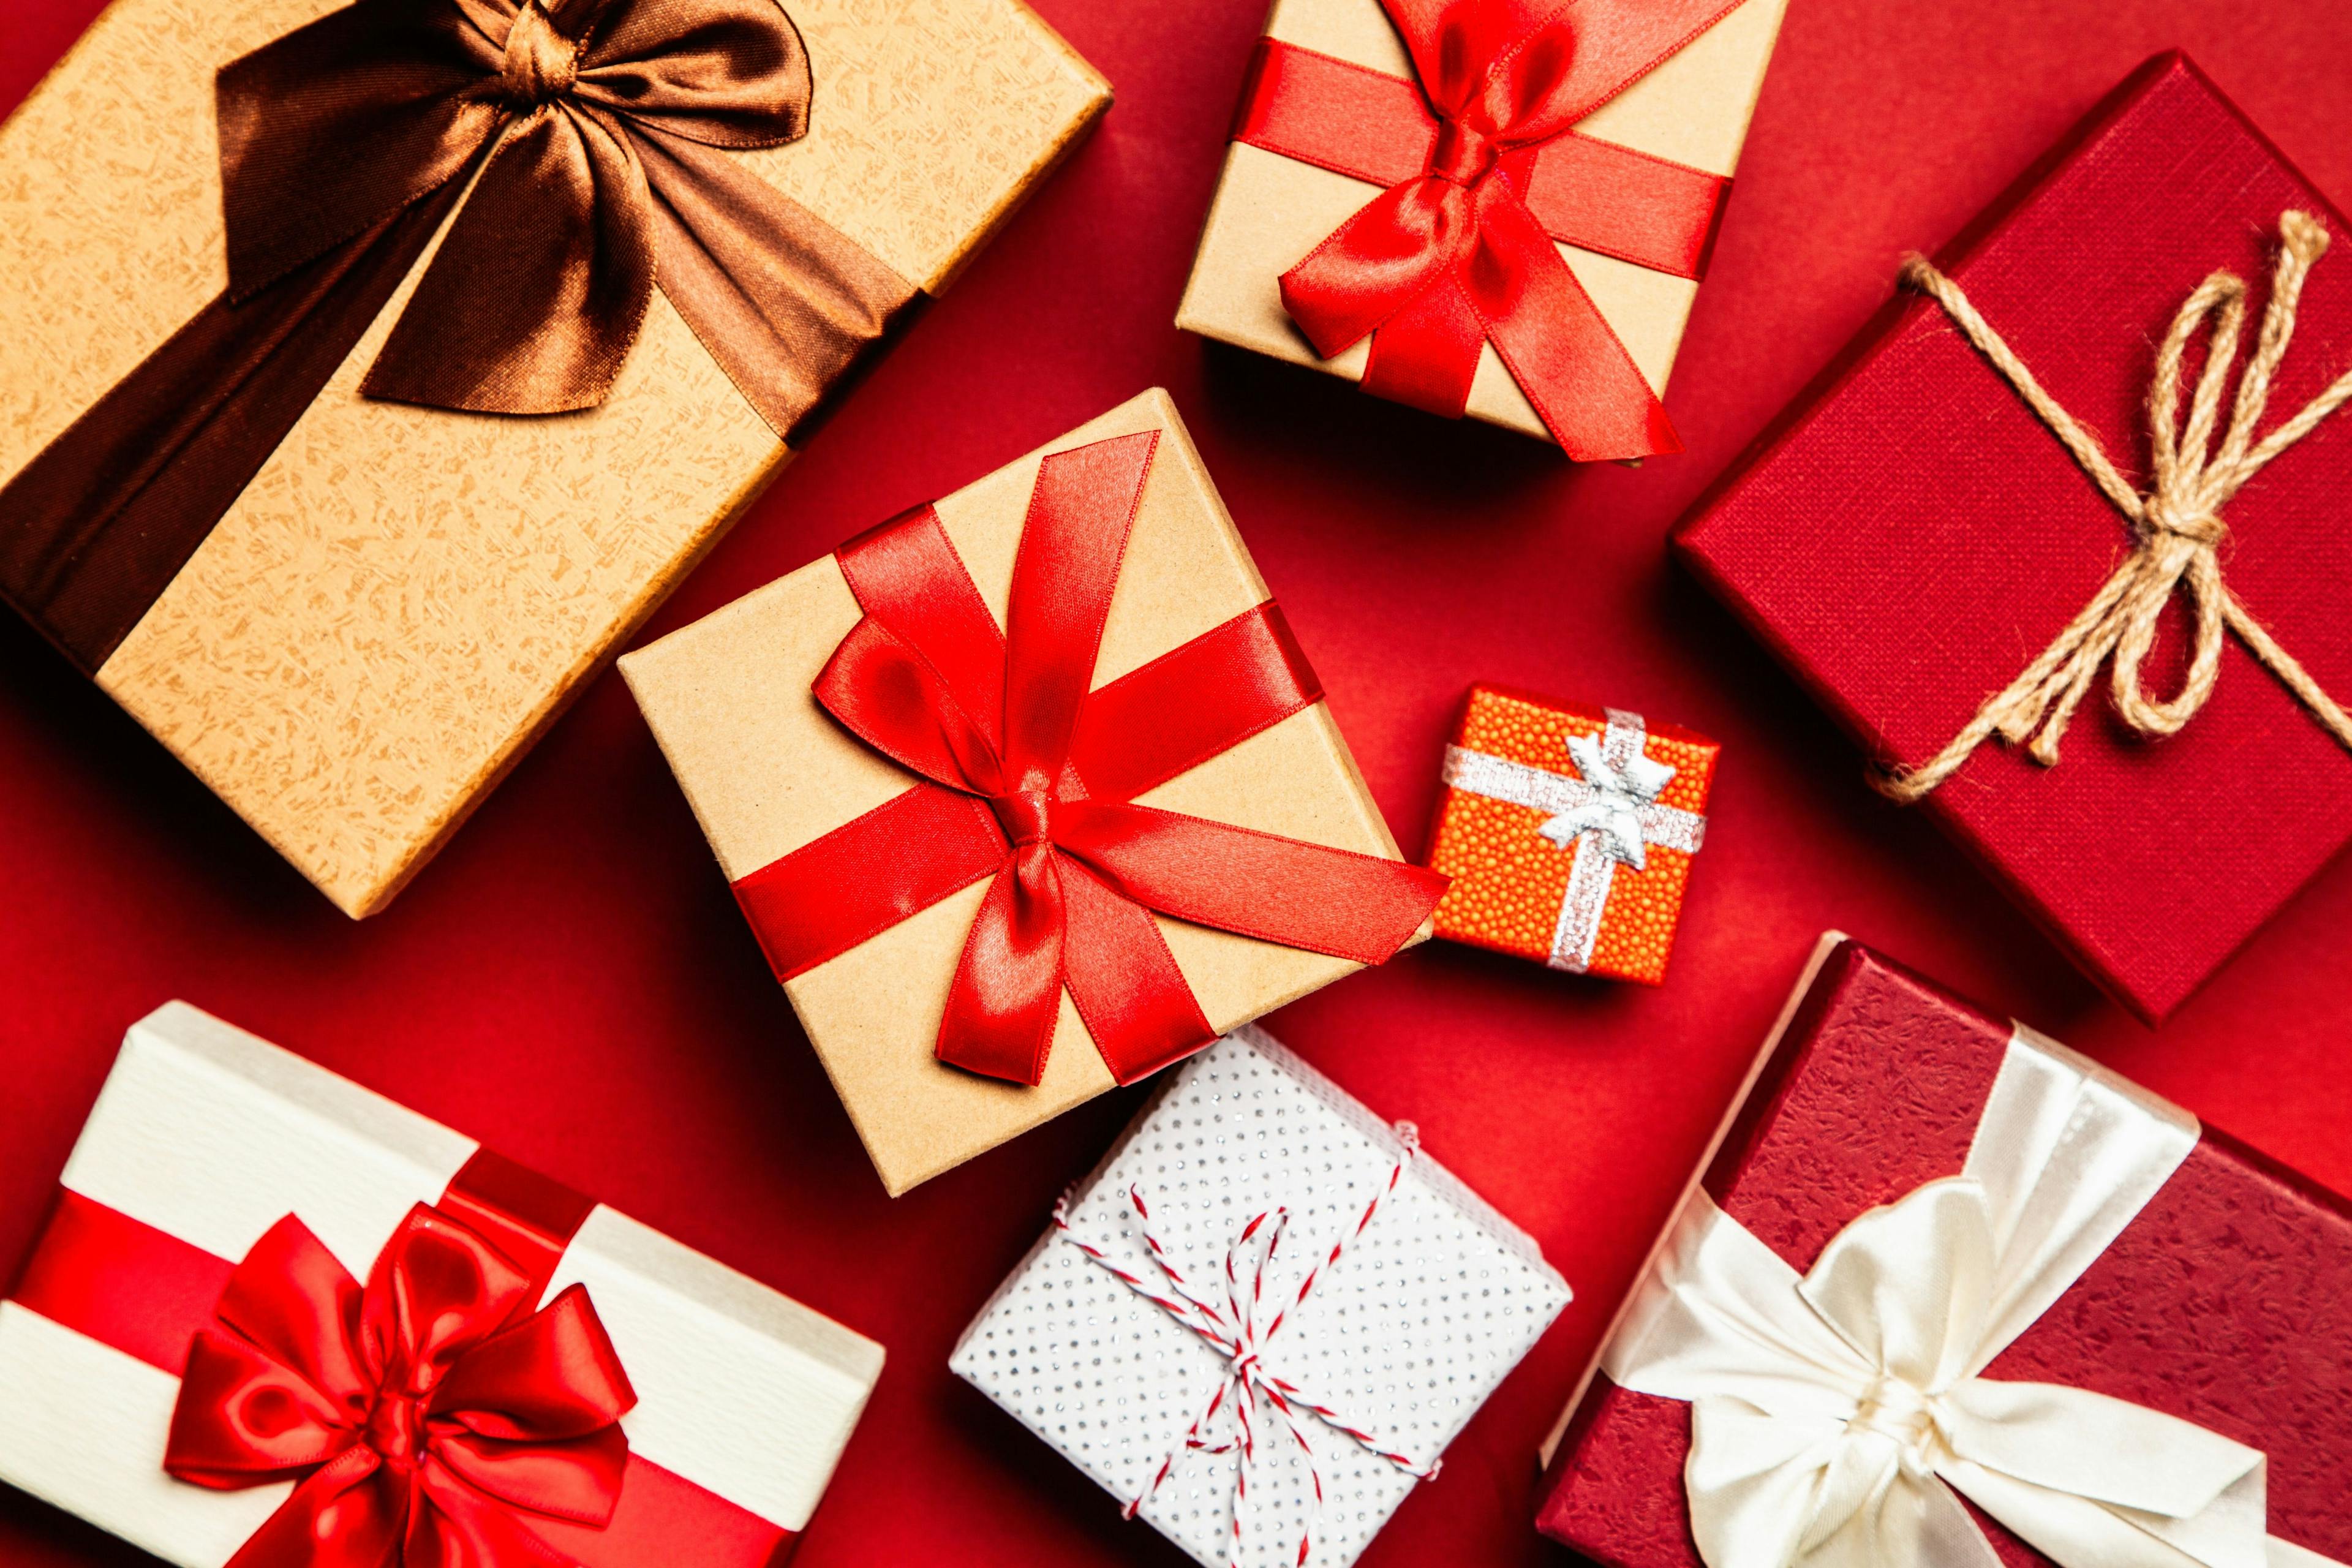 assortment of red, white, and brown gift boxes with a red background